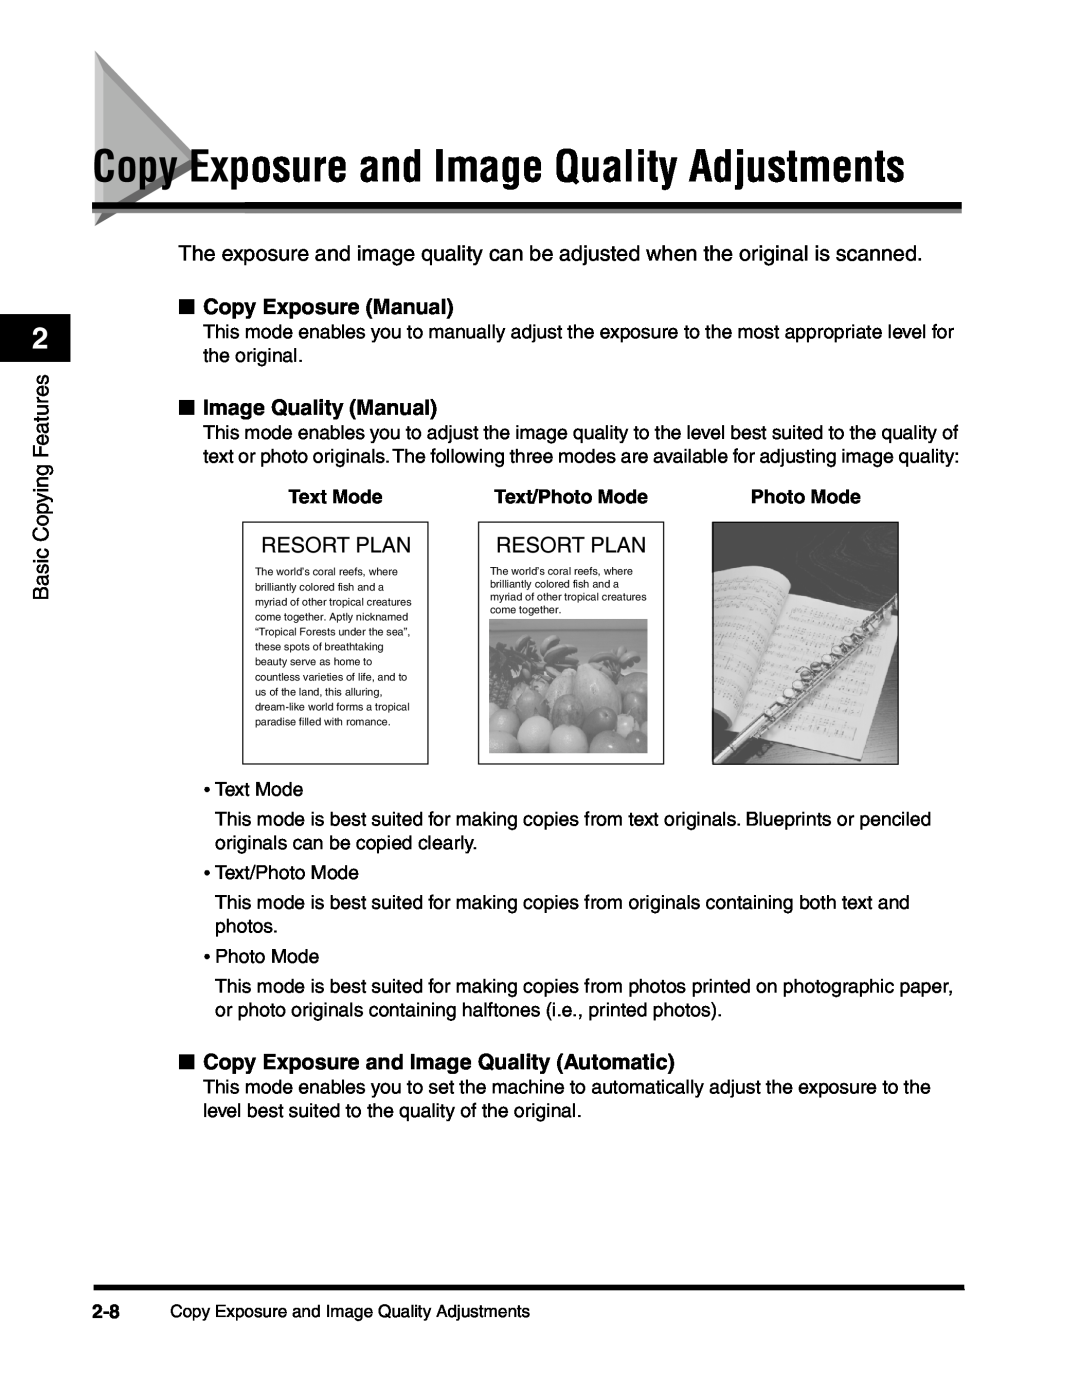 Canon 2010F Copy Exposure and Image Quality Adjustments, Copying Features, Copy Exposure Manual, Image Quality Manual 